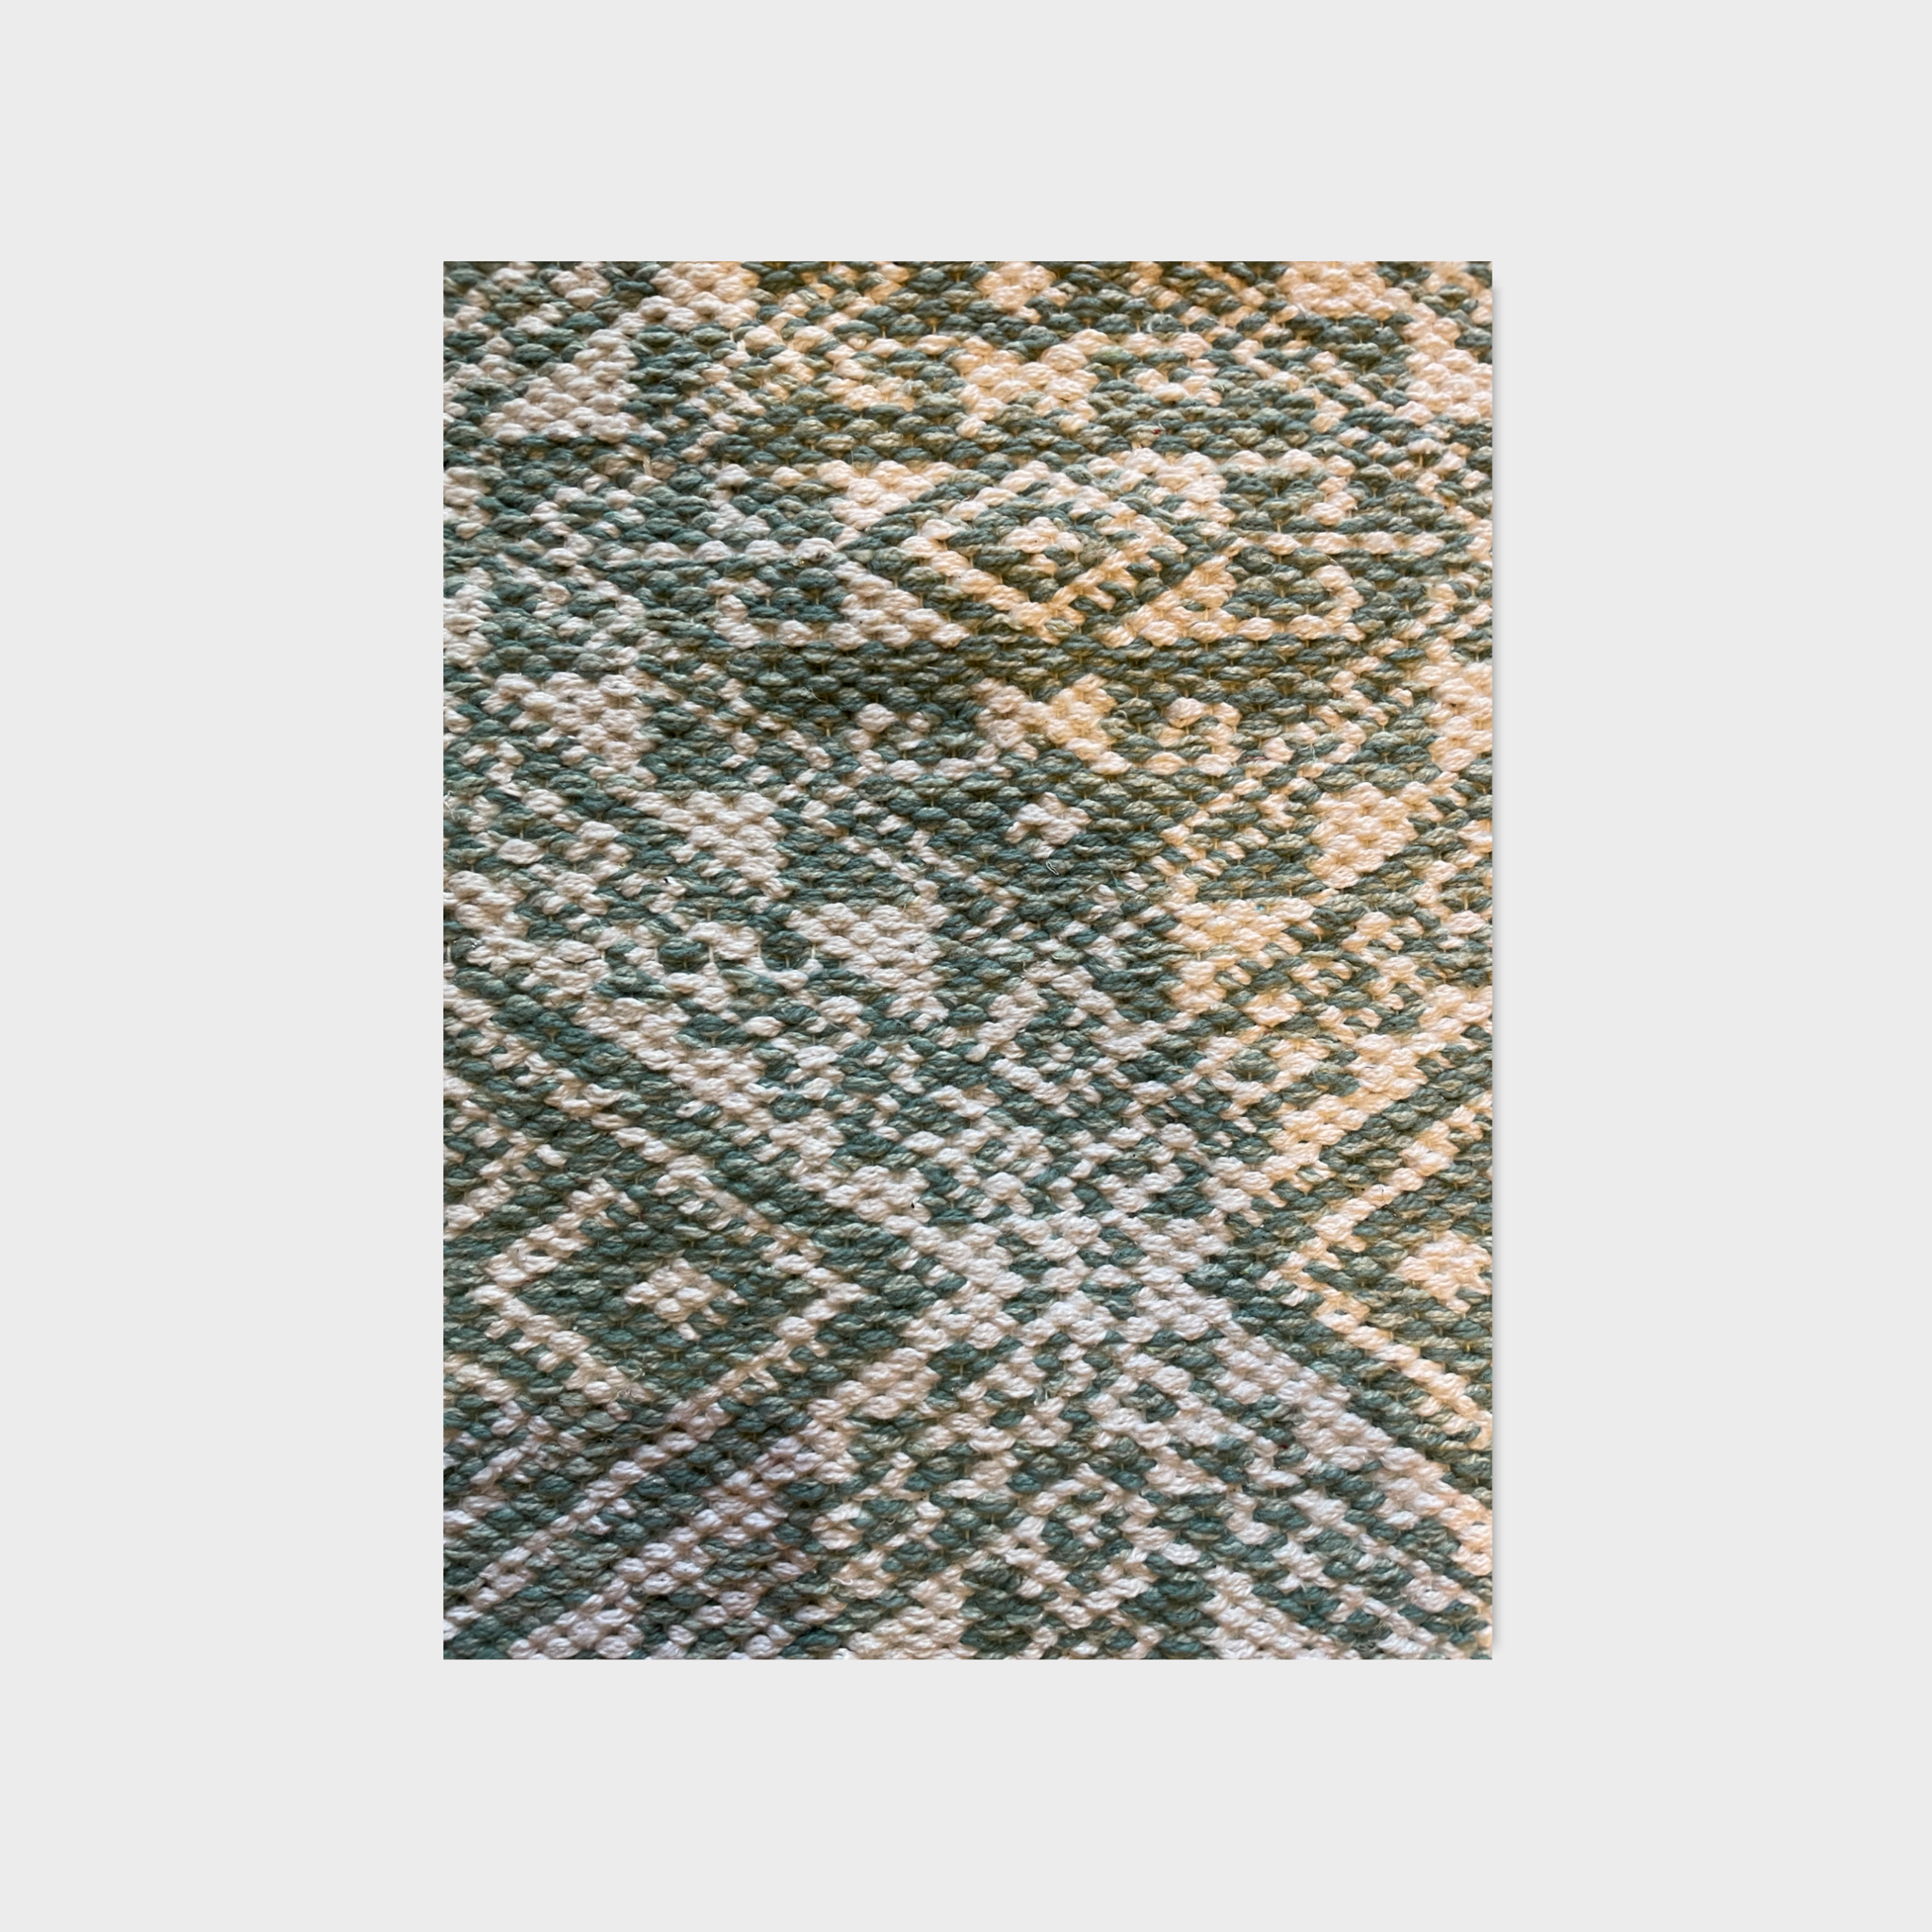 Handwoven Raffia scatter rug from India